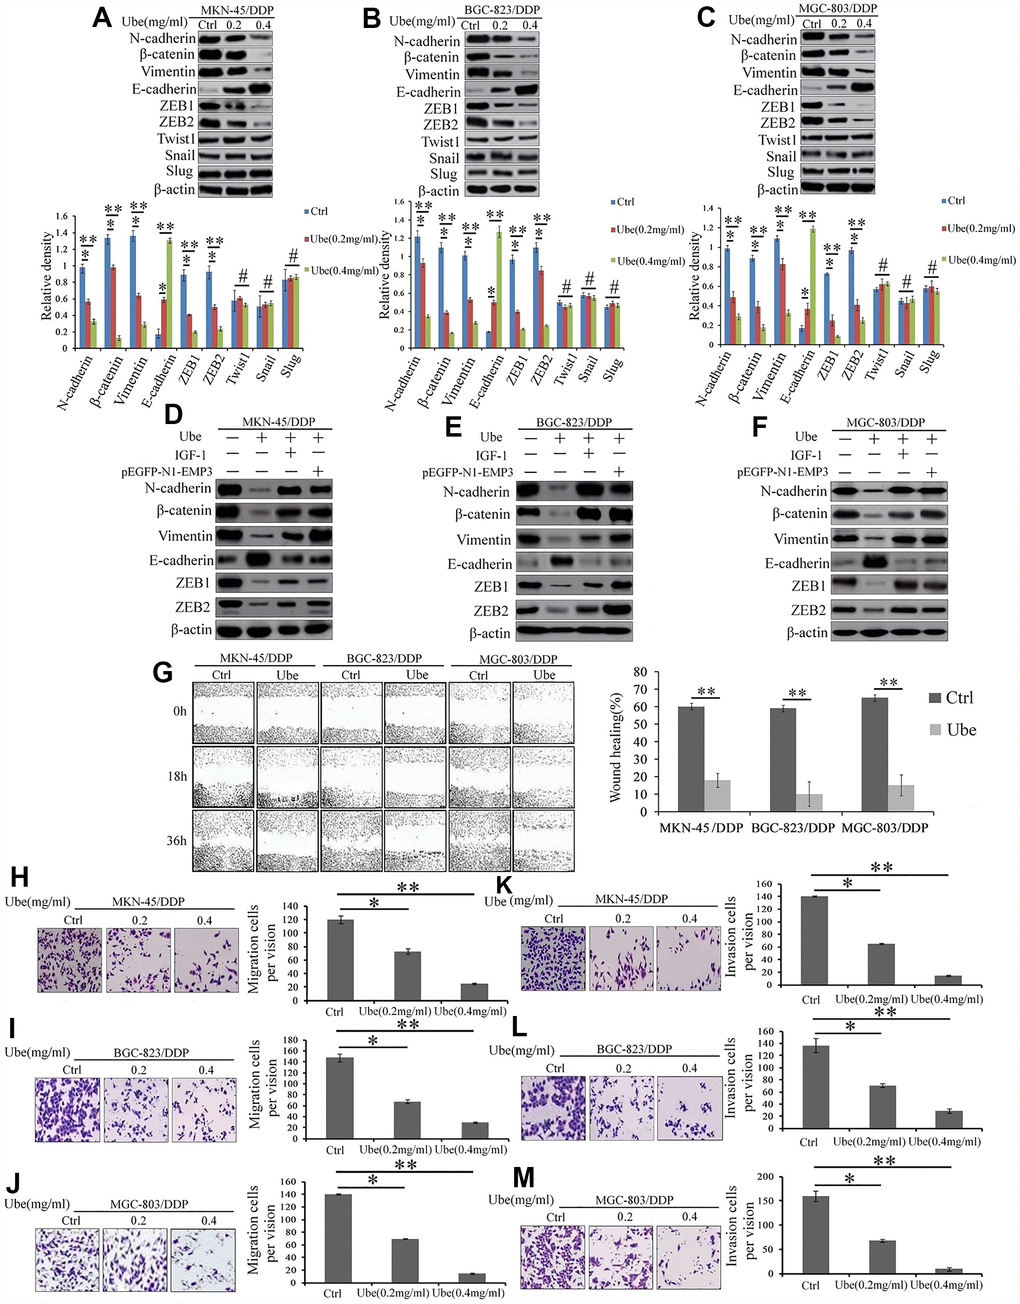 Ubenimex suppresses the EMT, migration, and invasion of CDDP- resistant GC cells by attenuating the activation of the CD13/EMP3/PI3K/AKT/NF-κB pathway. (A–C) Western blot assay was employed to explore the expression of EMT markers in MKN-45/DDP (A), BGC-823/DDP (B) and MGC-803/DDP cells (C), which were stimulated with Ubenimex (0.2 or 0.4 mg/mL) for 24 h. Data are expressed as the representatives (upper panels), and relative expression with means ±SD (bottom panels). **P0.05. (D–F) Indicated cells were pre-treated with pEGFP-N1-EMP3 plasmid for 24 h or IGF-1 (10ng/mL)or 8h, followed by treatment with Ubenimex (0.4mg/mL) for another 24 h, indicated EMT markers in MKN-45/DDP cells (D), BGC-823/DDP (E) and MGC-803/DDP (F) cells were detected by Western blot assay. (G) Wound healing assays were carried out to determine the migration abilities of CDDP-resistant GC cells which were treated with Ubenimex. Cell morphology of gap with different widths at 0, 18, and 36 h were obtained (left panels), and data are summarized as the means ± SD of “healing ratio”(right panel) **PH–M) Transwell assays was performed to identify the changes of the migration (H–J) and invasive (K–M) abilities in CDDP-resistant GC cells which were treated with Ubenimex (0.2 or 0.4 mg/mL) for 24h. Results were shown as the representatives (left panels) and the number of migrated and invasive cells with the means±SD (right panels) from three experiments. *P